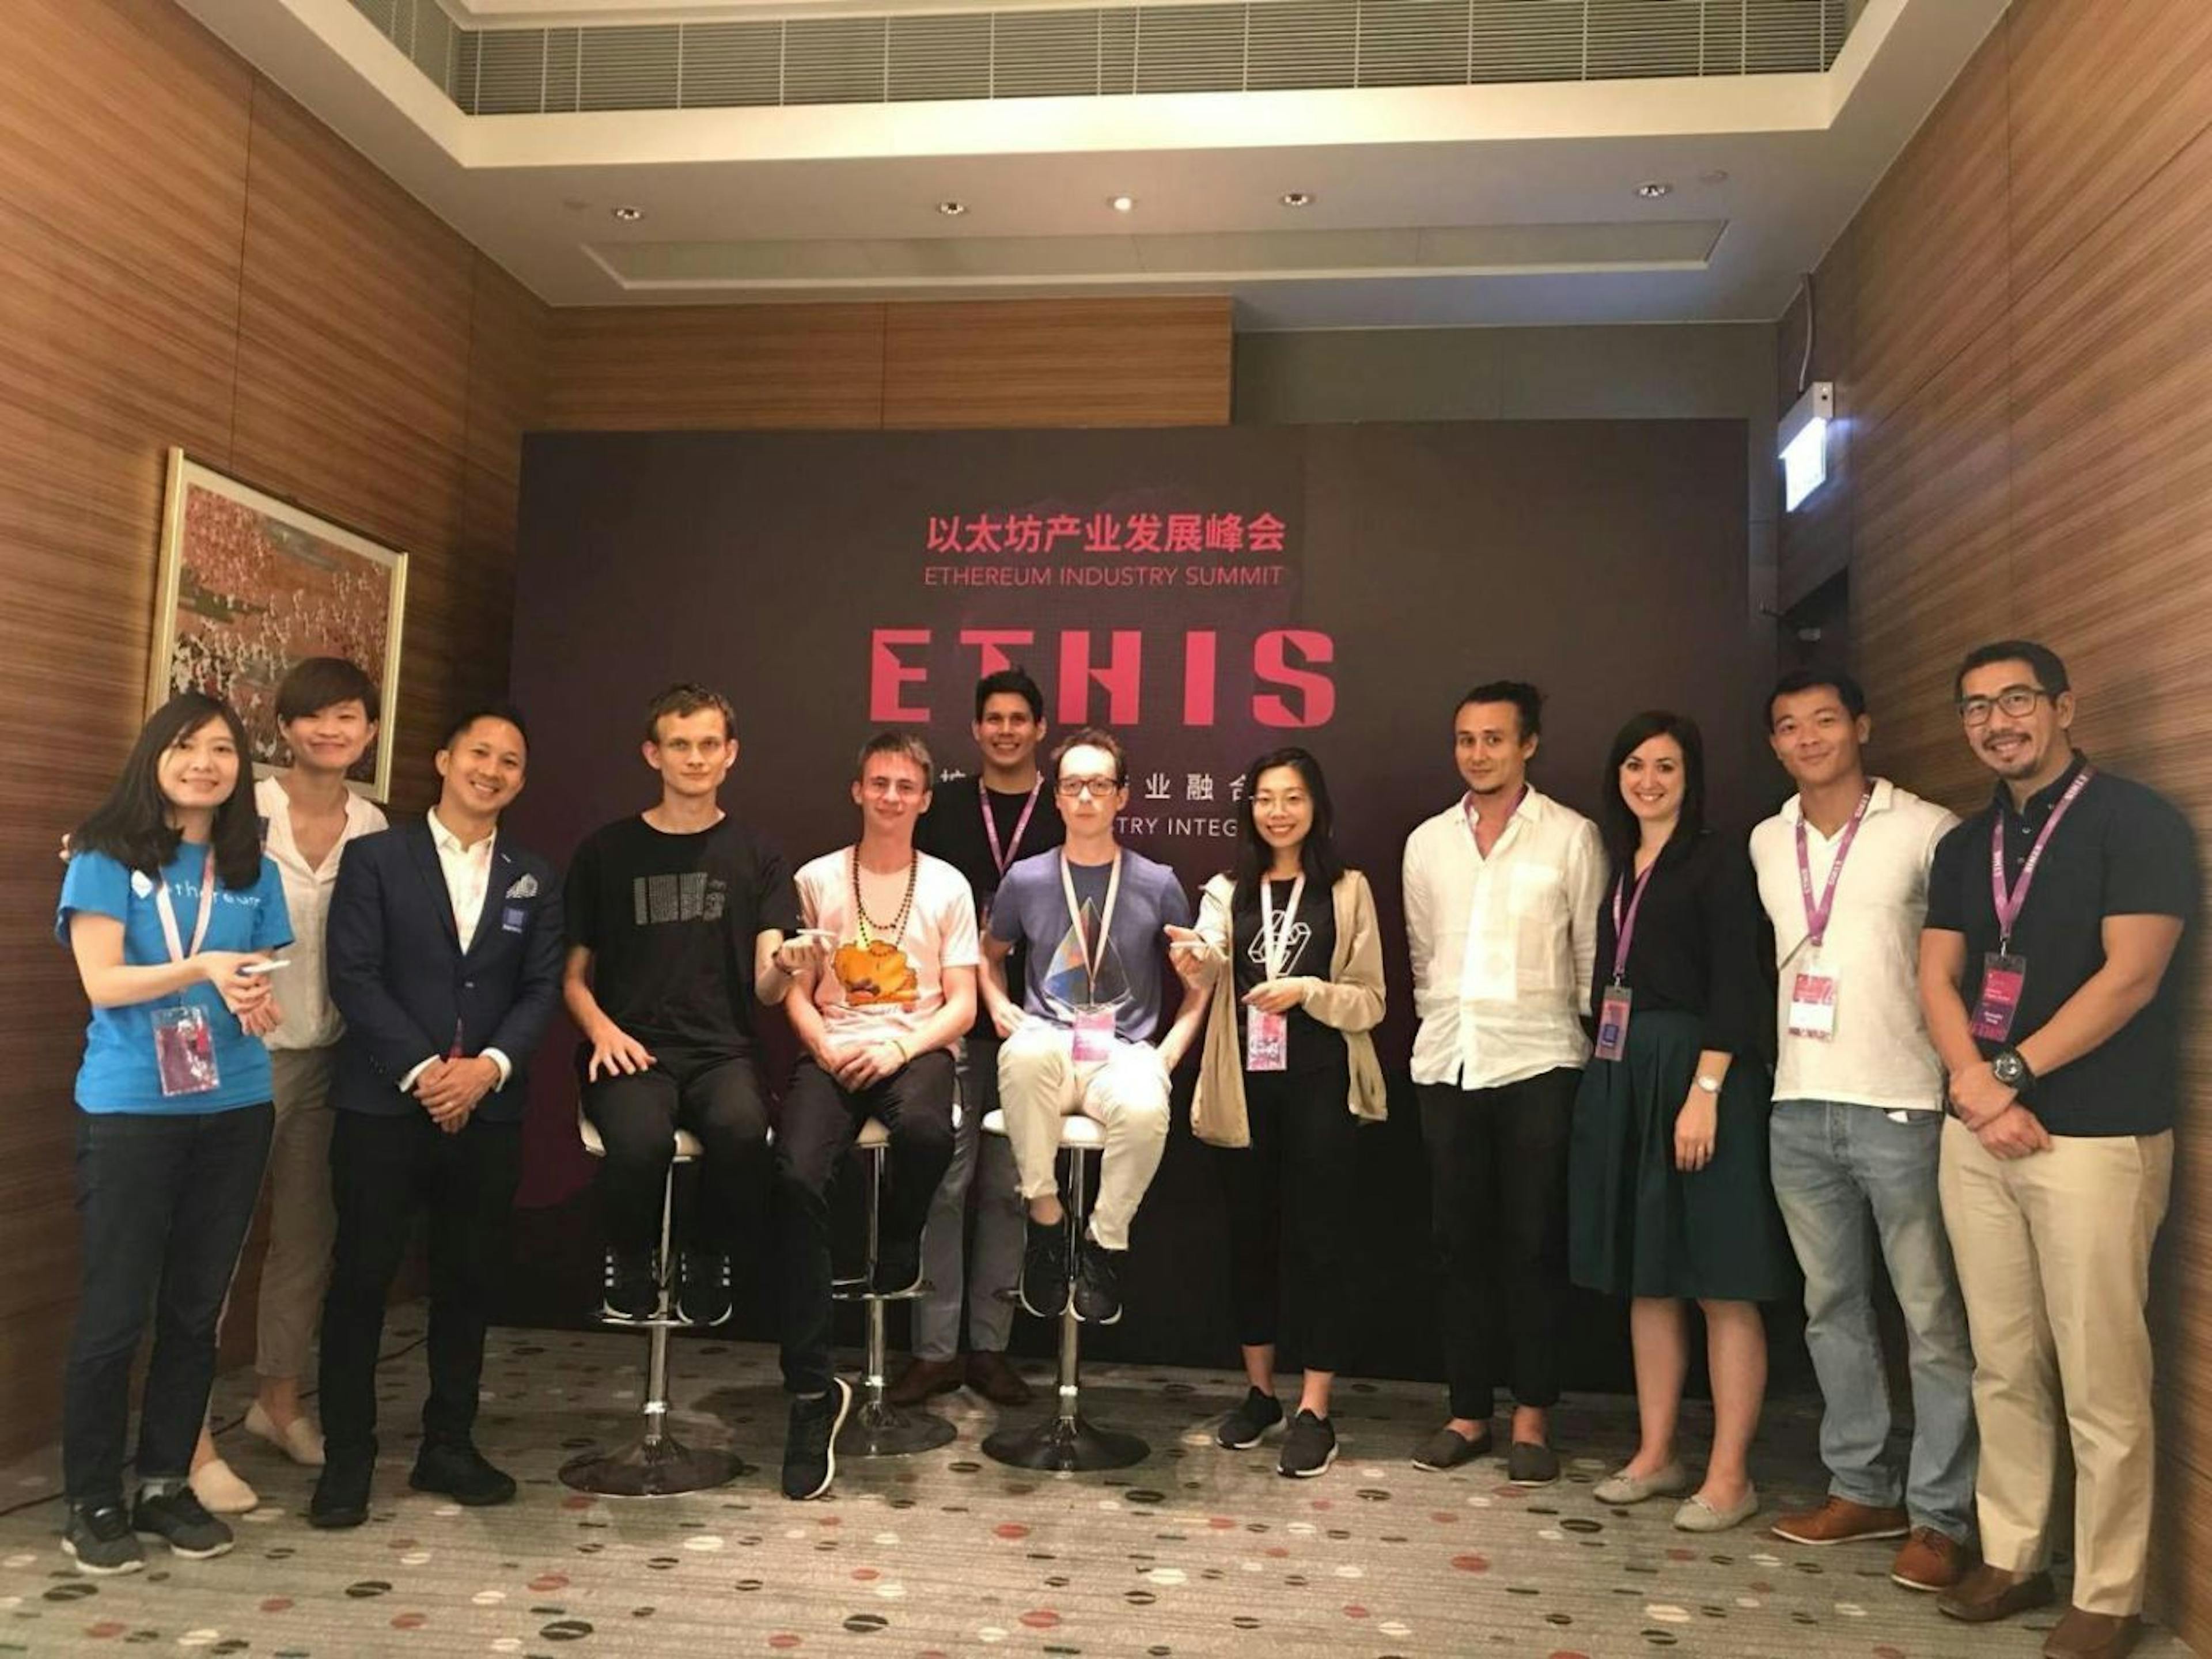 Tamir and DOTTED's Co-Founder and CTO Christopher Cheung, with Vitalik Buterin and others from the Ethereum development team at a Hong Kong conference in 2018